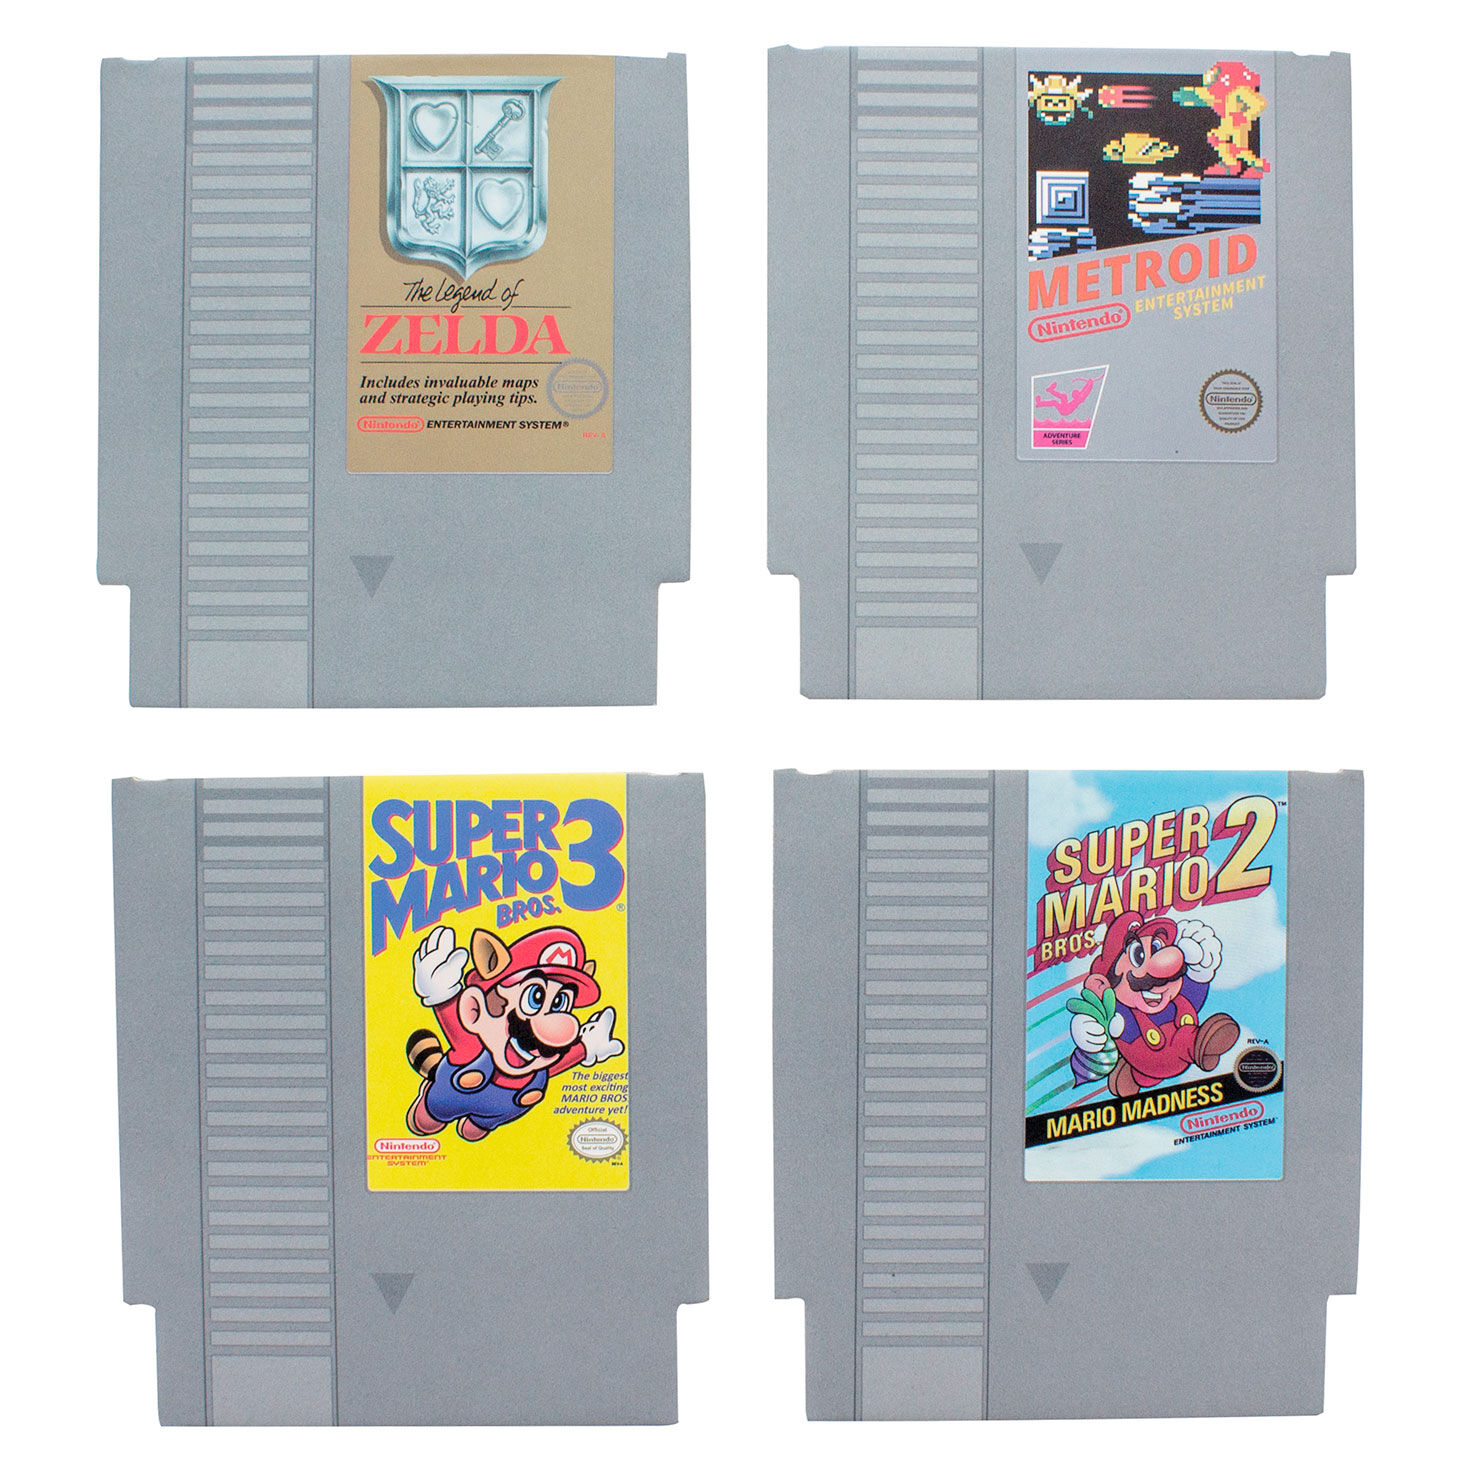 Nintendo Entertainment System Game Cartridge Coasters, Set of 8 for only USD 9.99 | Hallmark